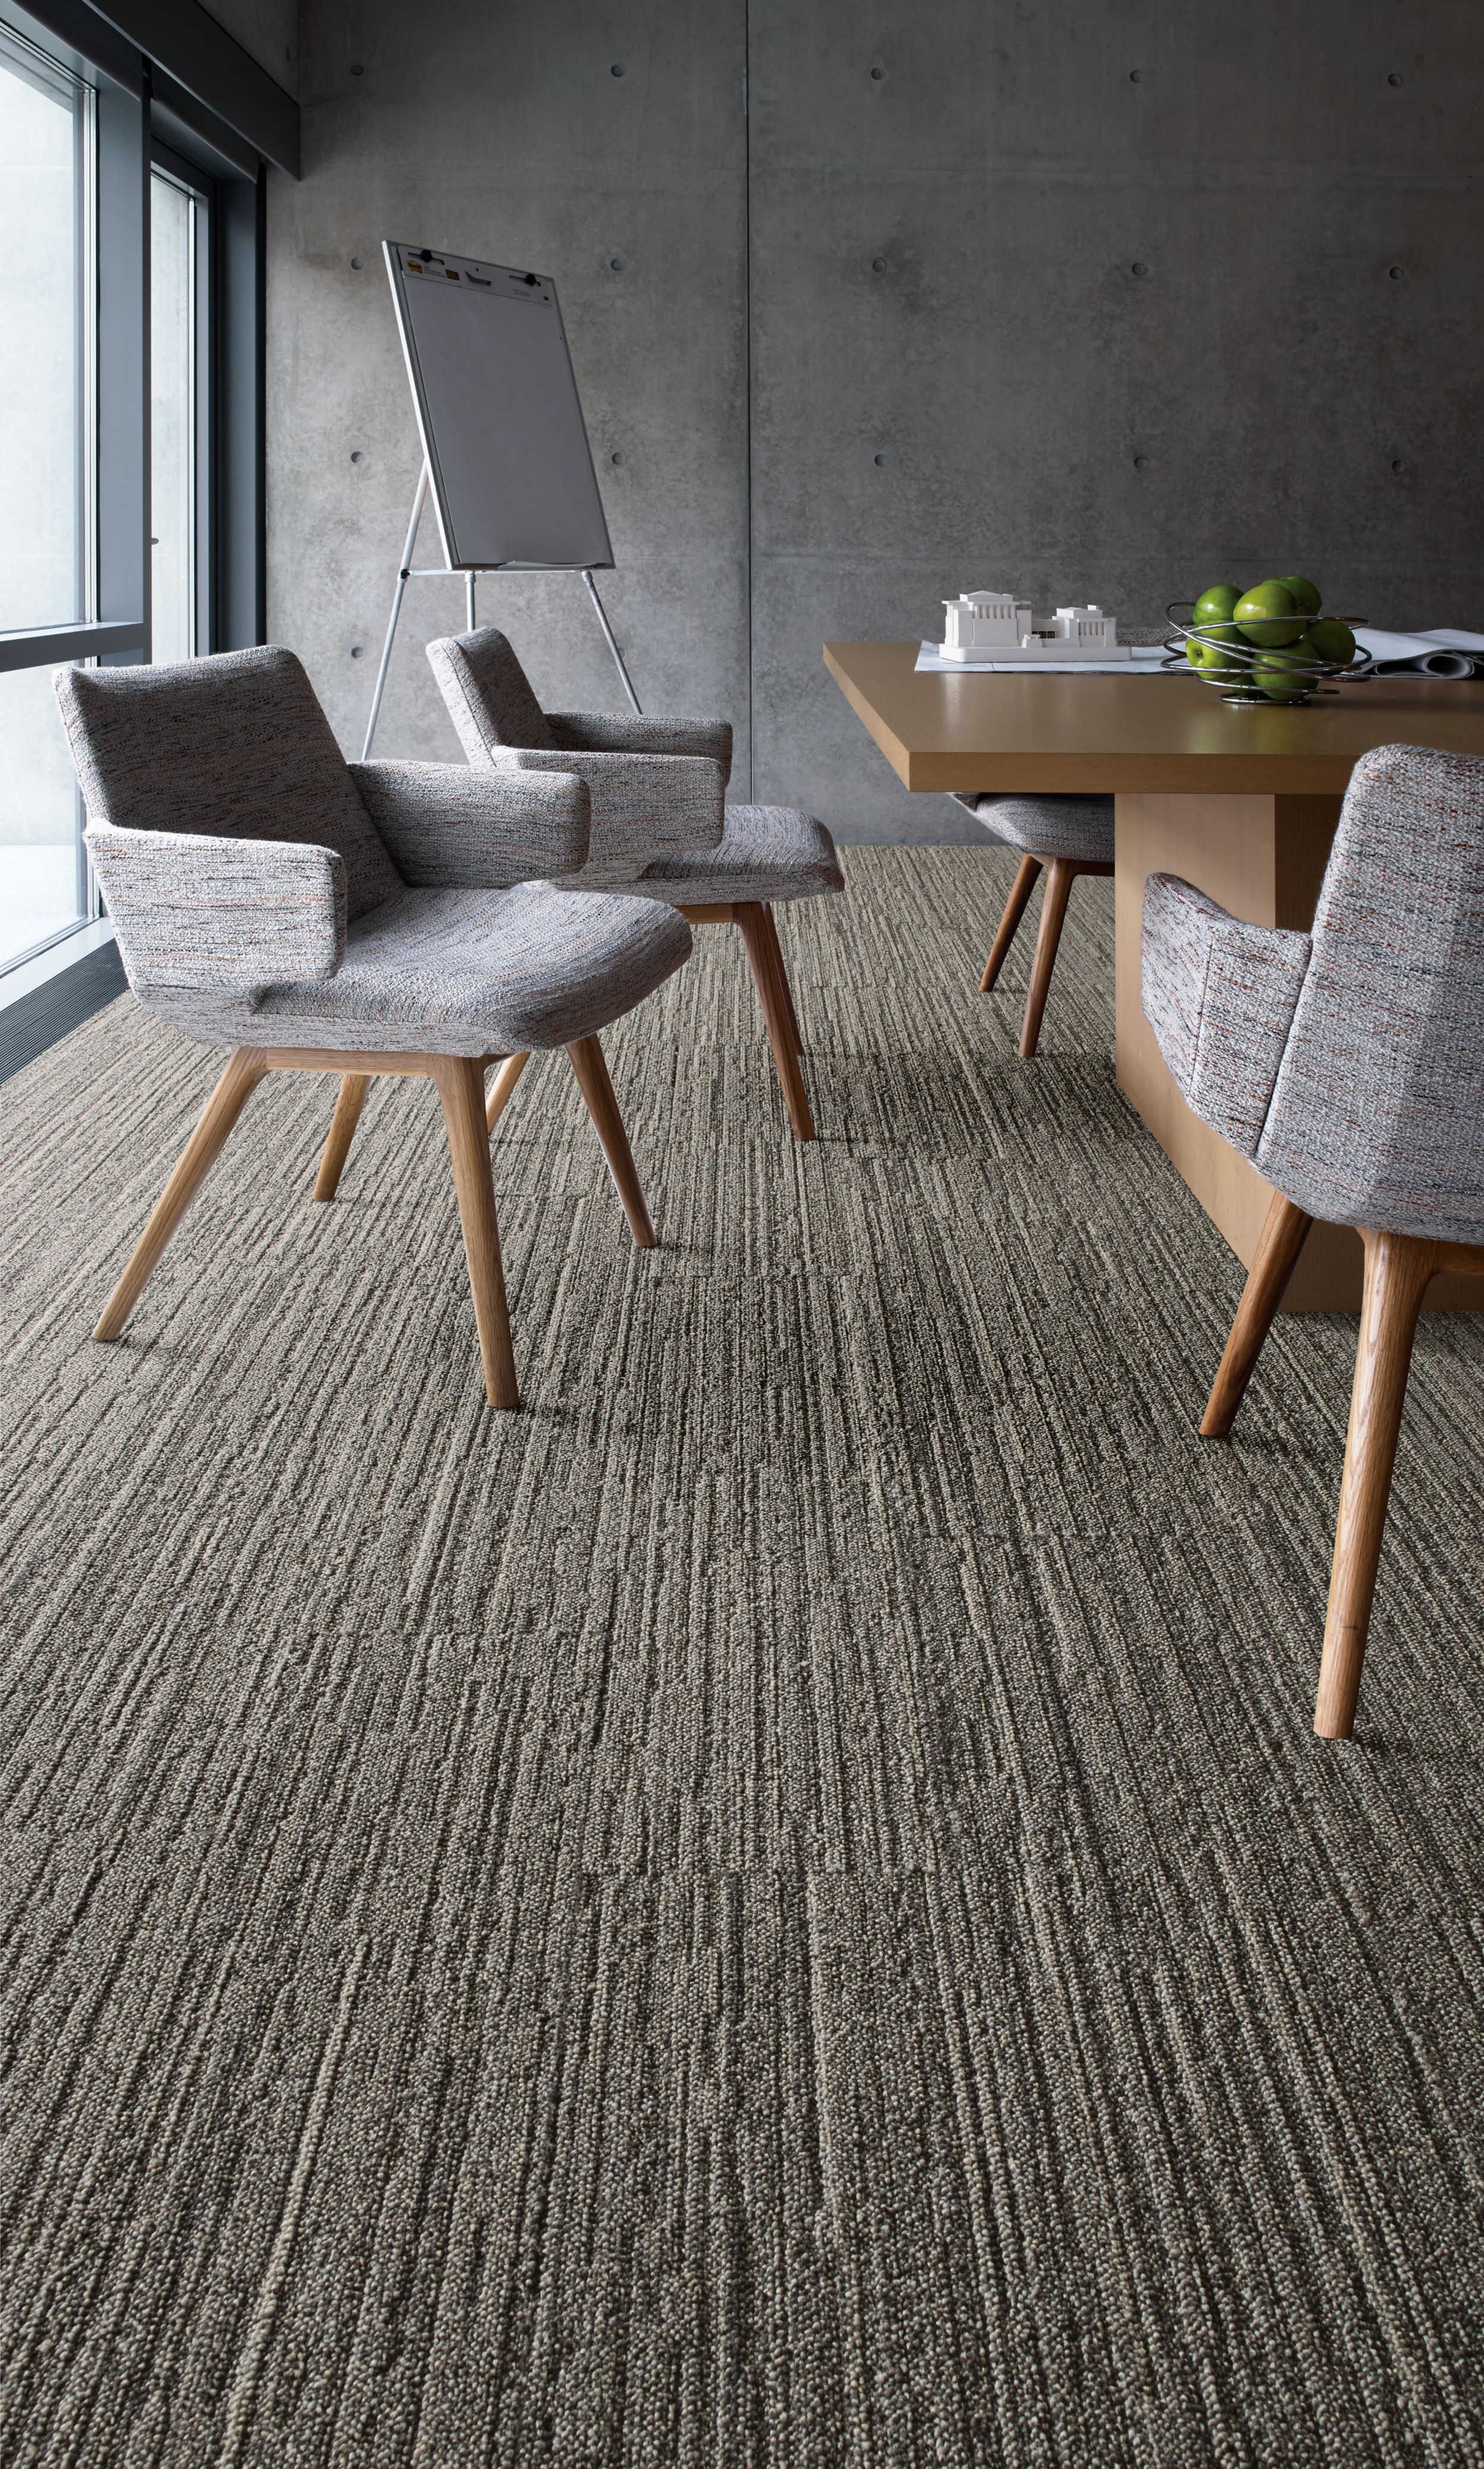 Interface WW880 plank carpet tile in meeting room with table and chairs número de imagen 5